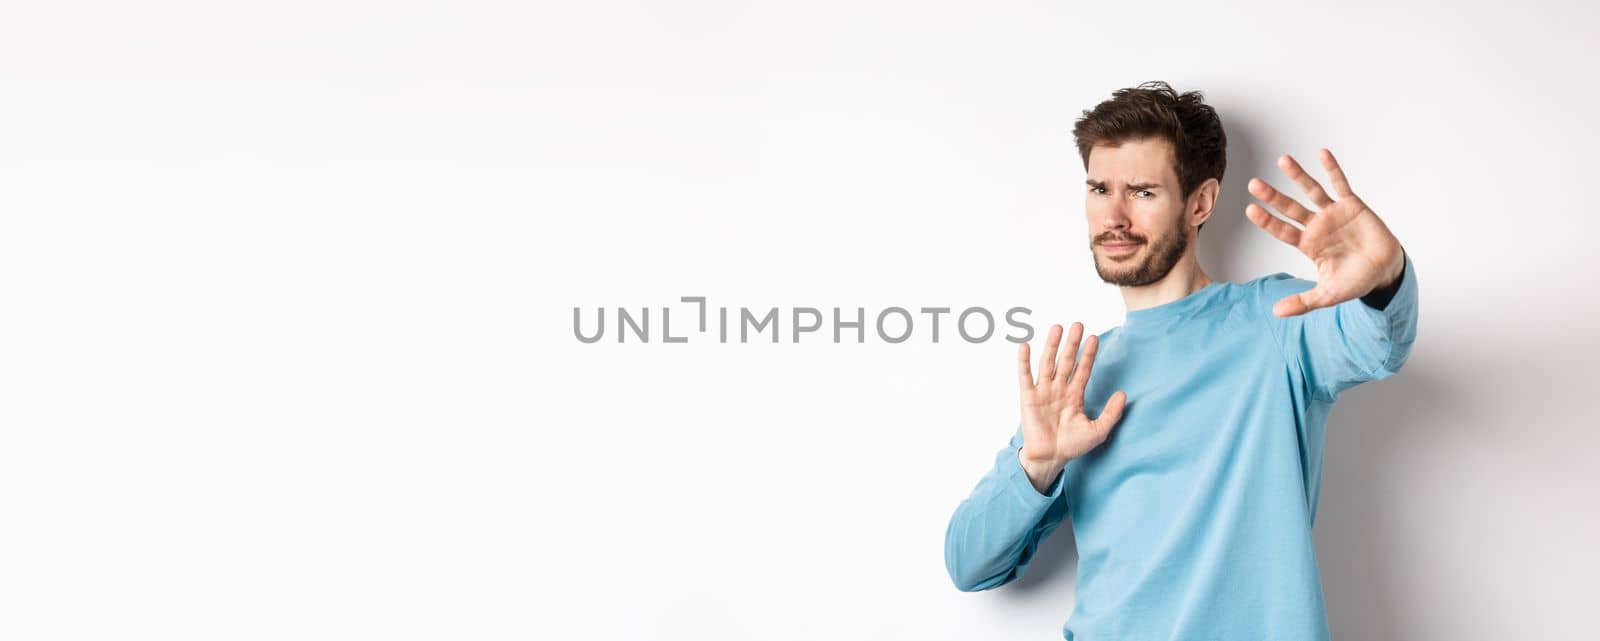 Stay away from me. Reluctant young man step back with hands stretch out in defensive gesture, protecting himself, standing over white background.